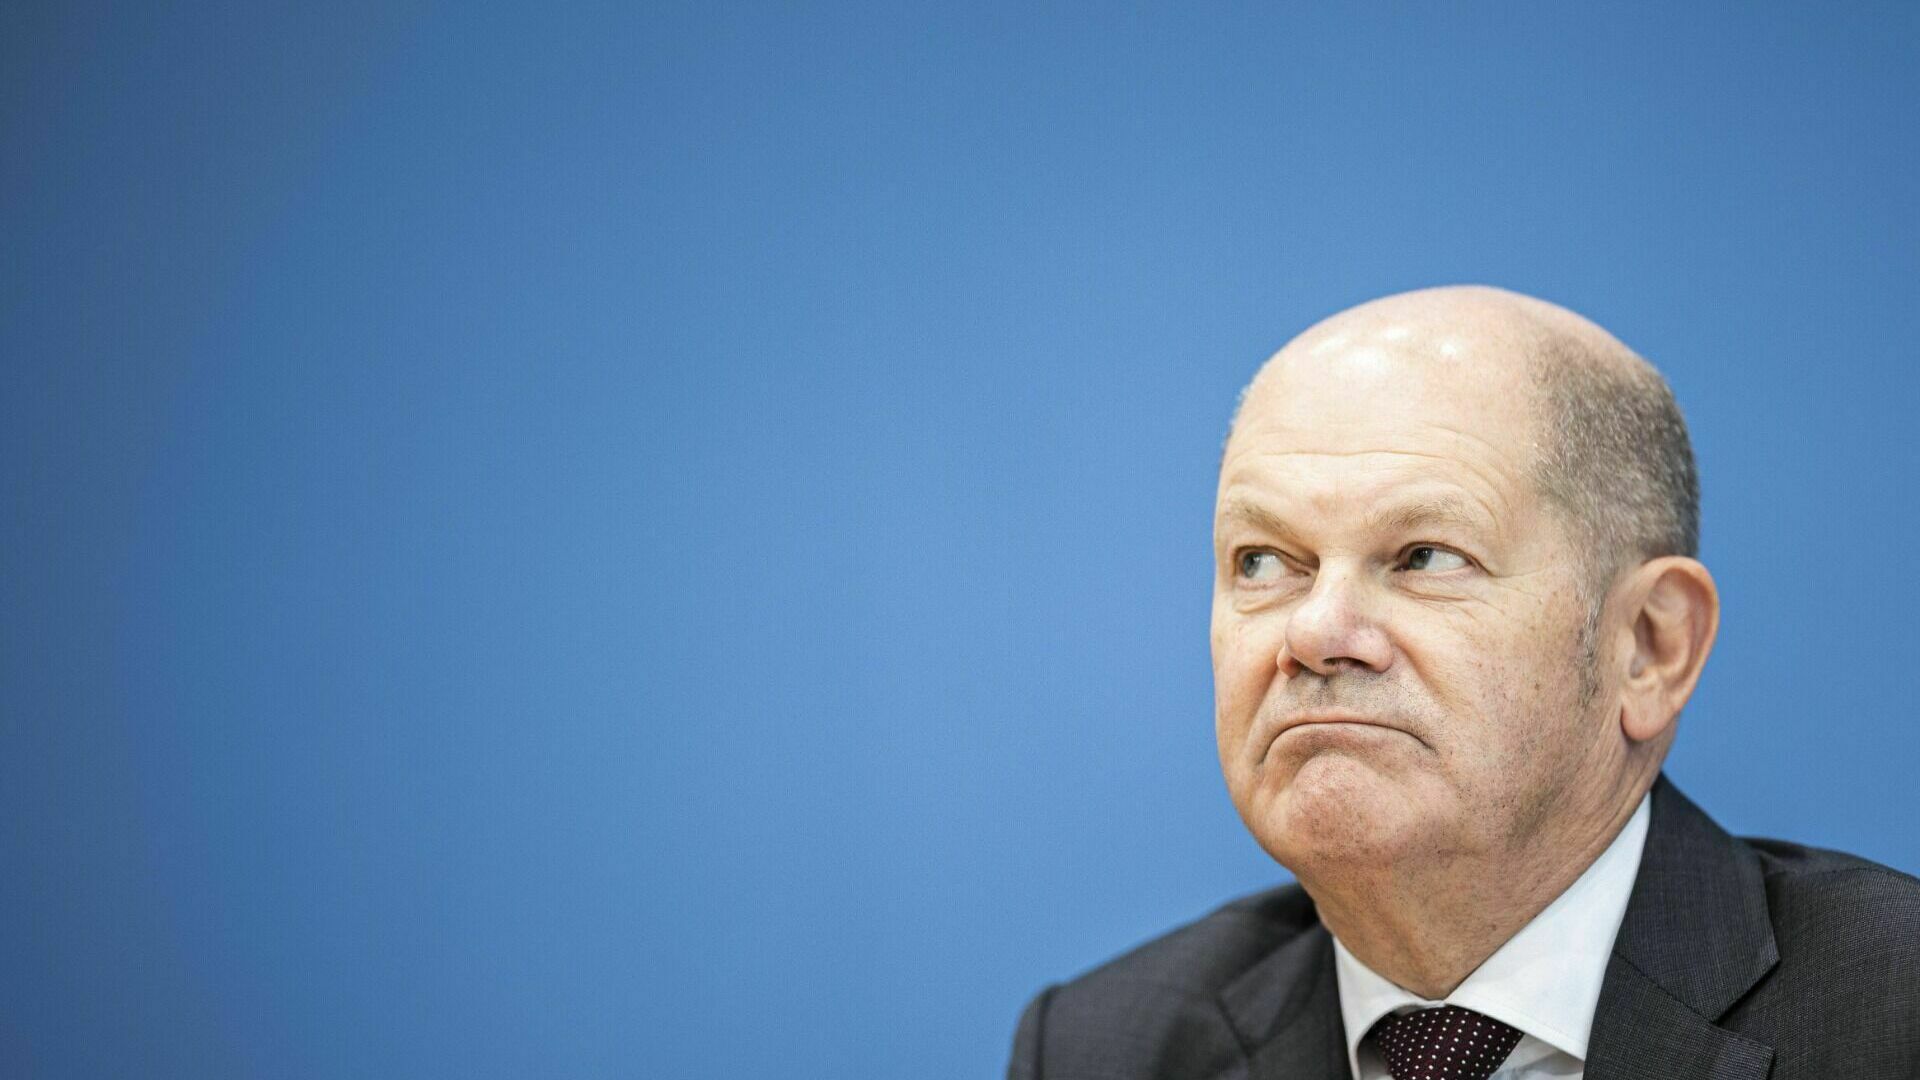 Olaf Scholz is suspected of bank fraud that took place ten years ago